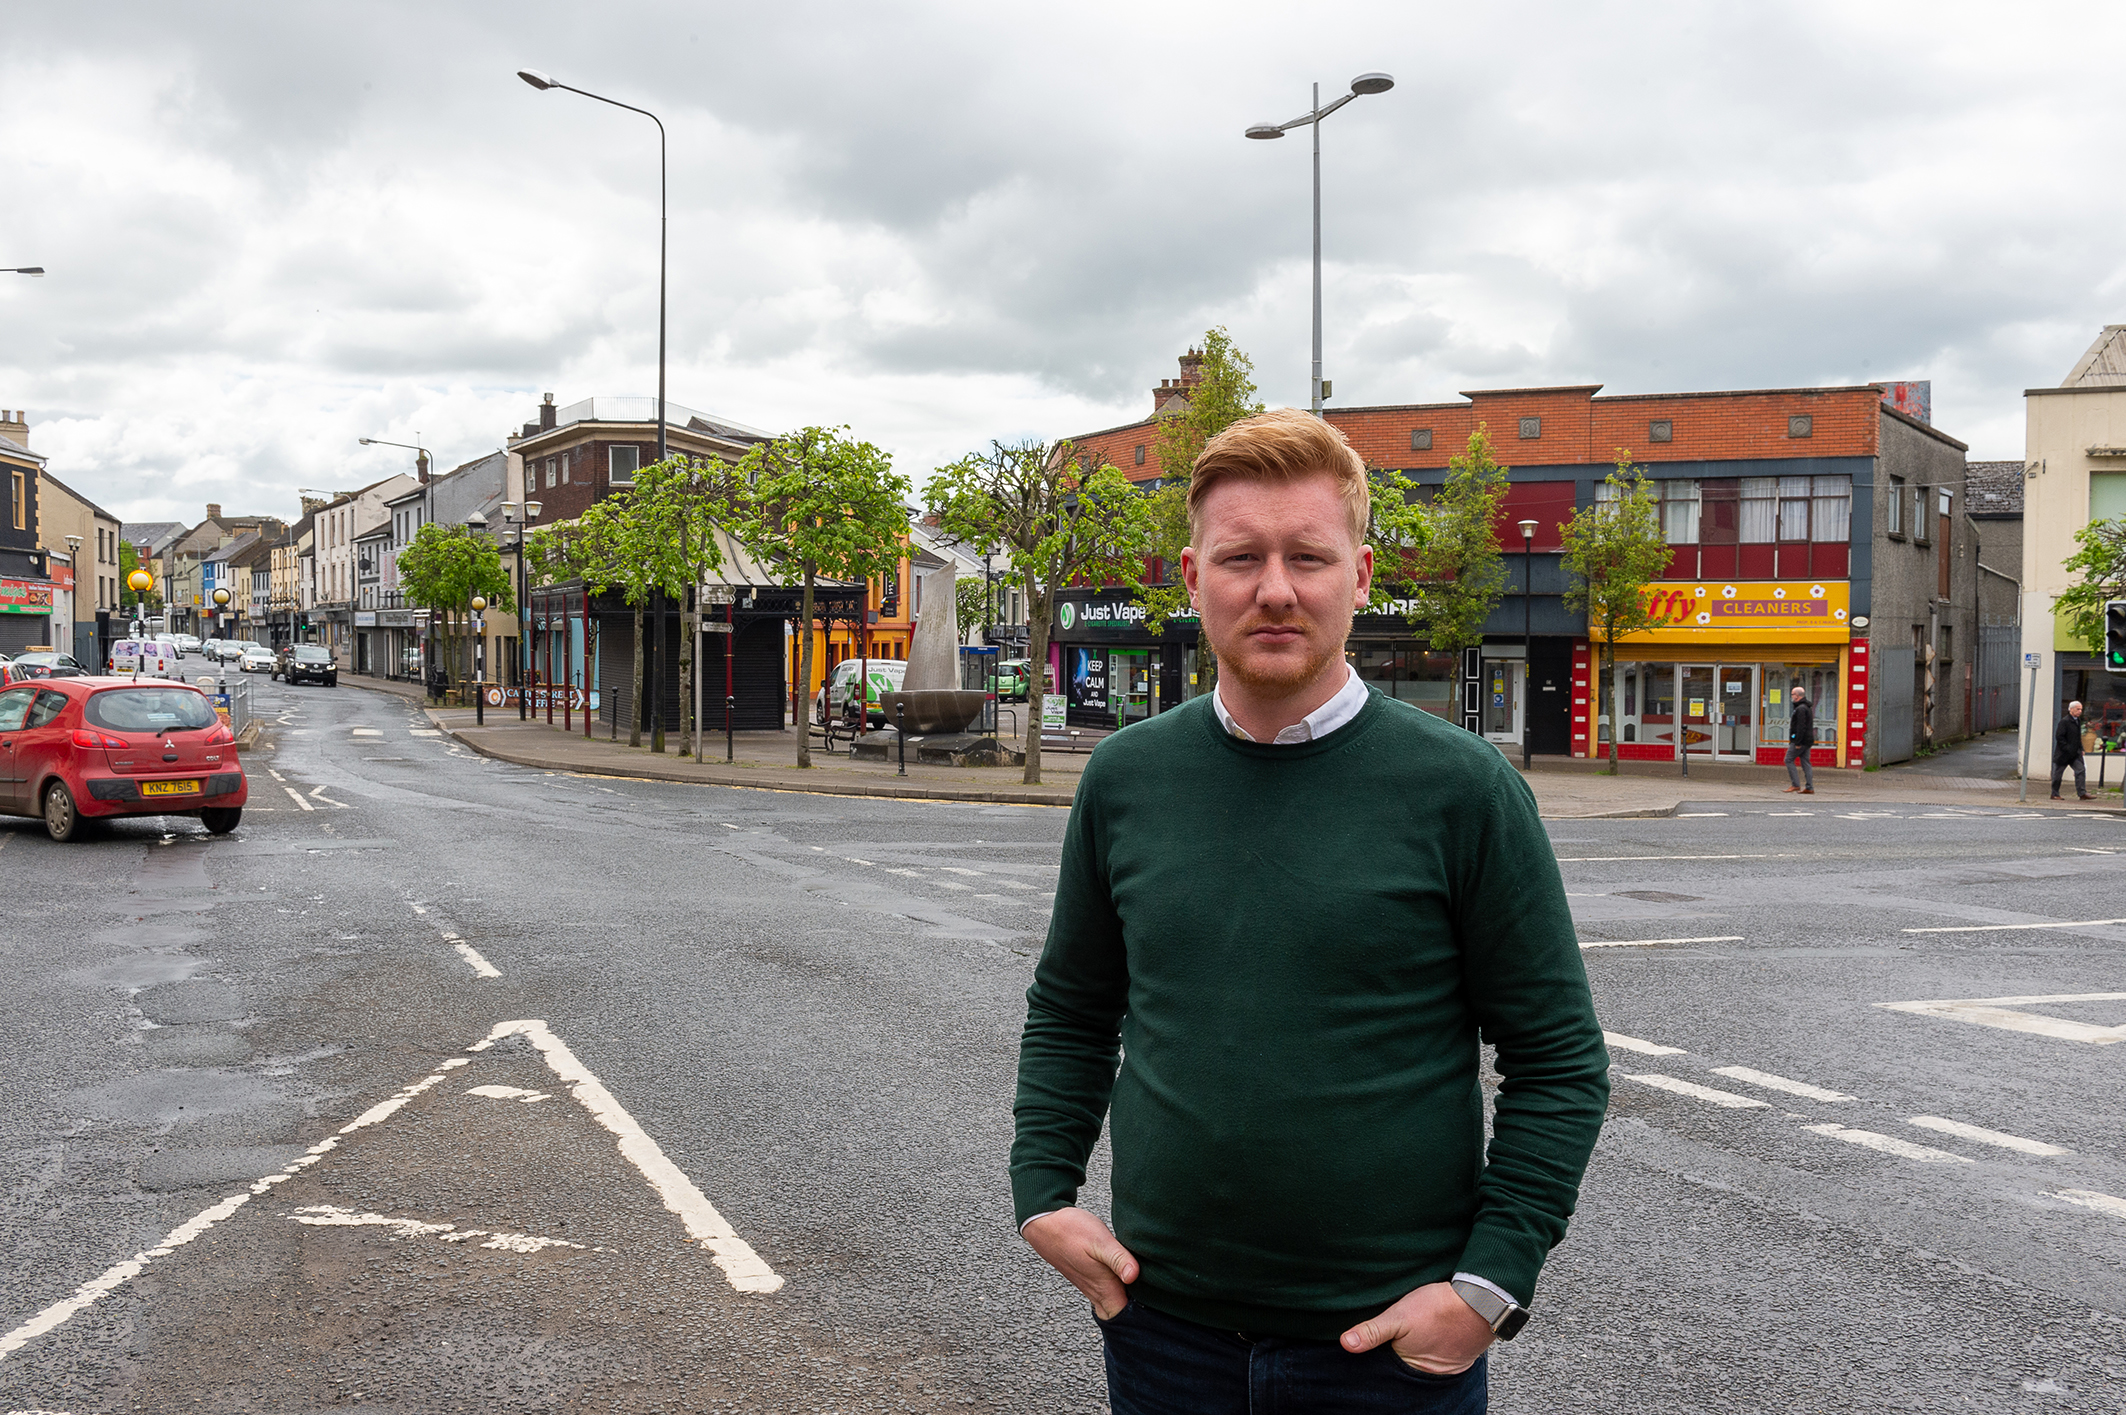 McCrossan elected as SDLP chairman